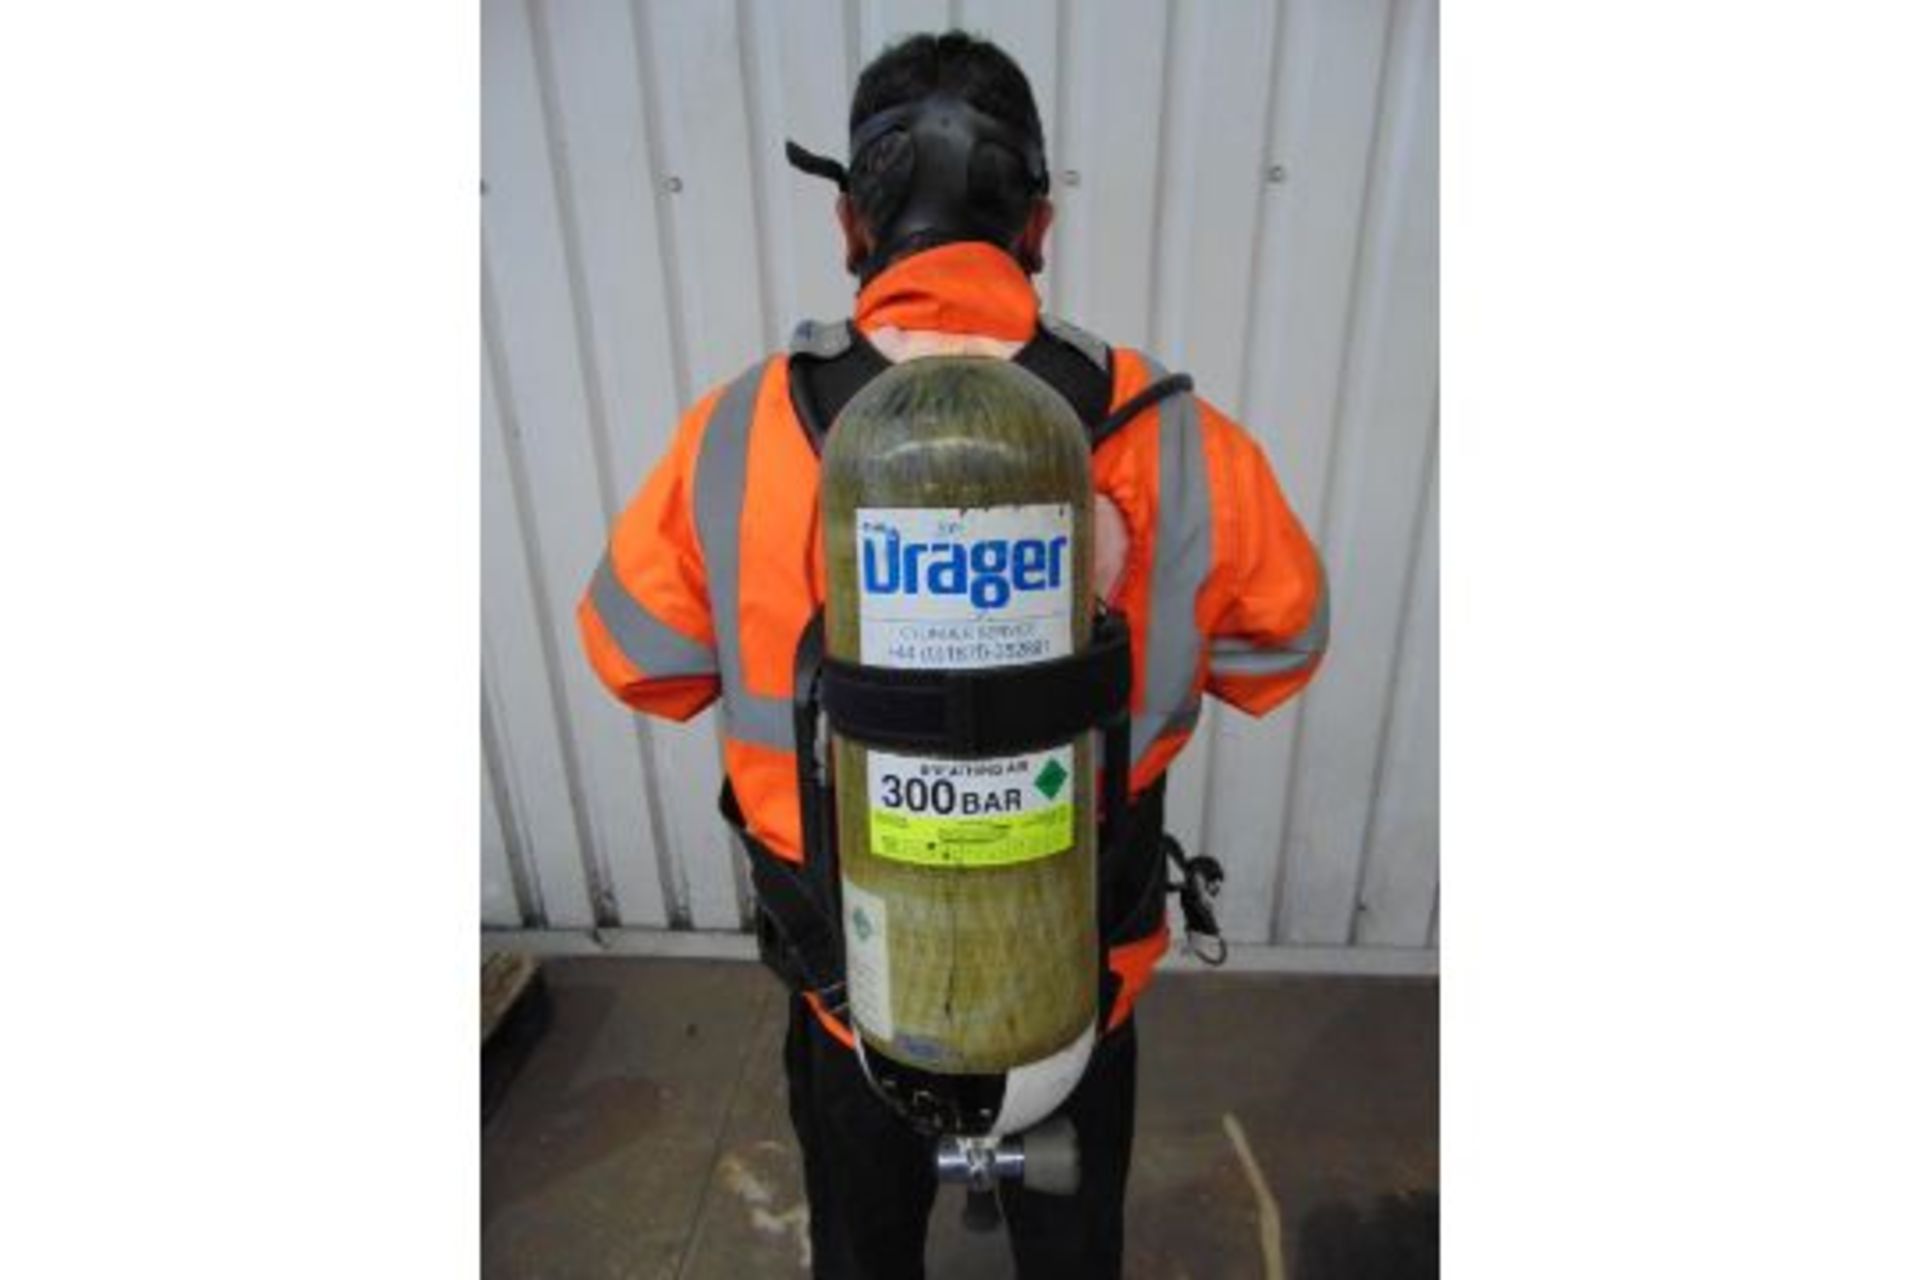 5 x Drager PSS 7000 Self Contained Breathing Apparatus w/ 10 x Drager 300 Bar Air Cylinders - Image 20 of 22